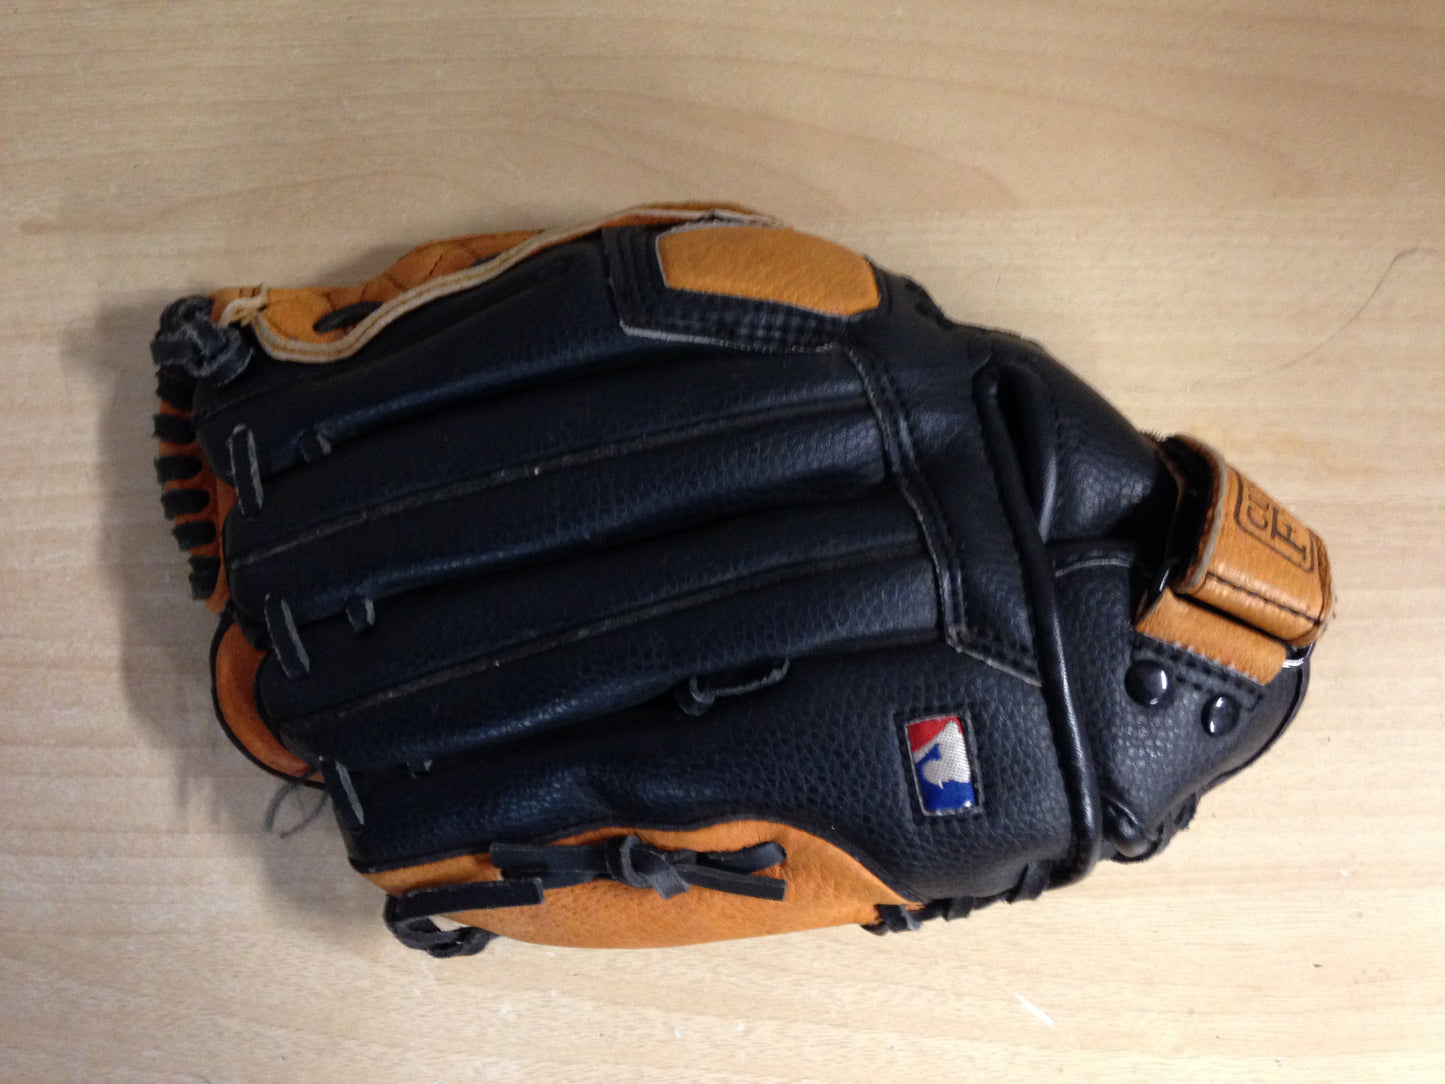 Baseball Glove Adult Size 11 inch Wilson C245 Leather Black Brown Fits on Left Hand Excellent